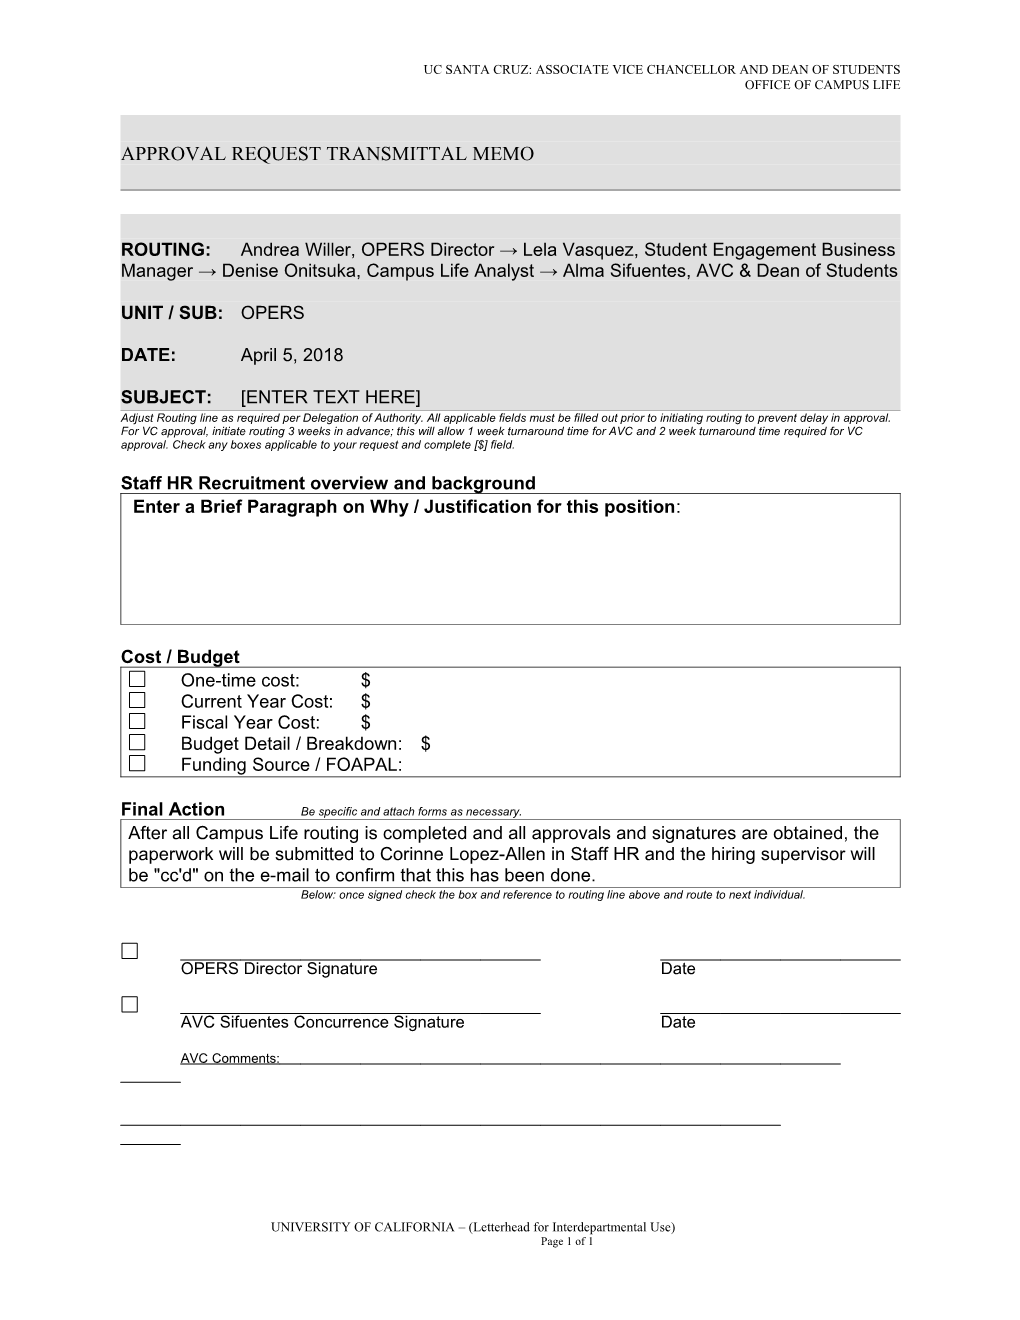 Approval Request Transmittal Memo Template